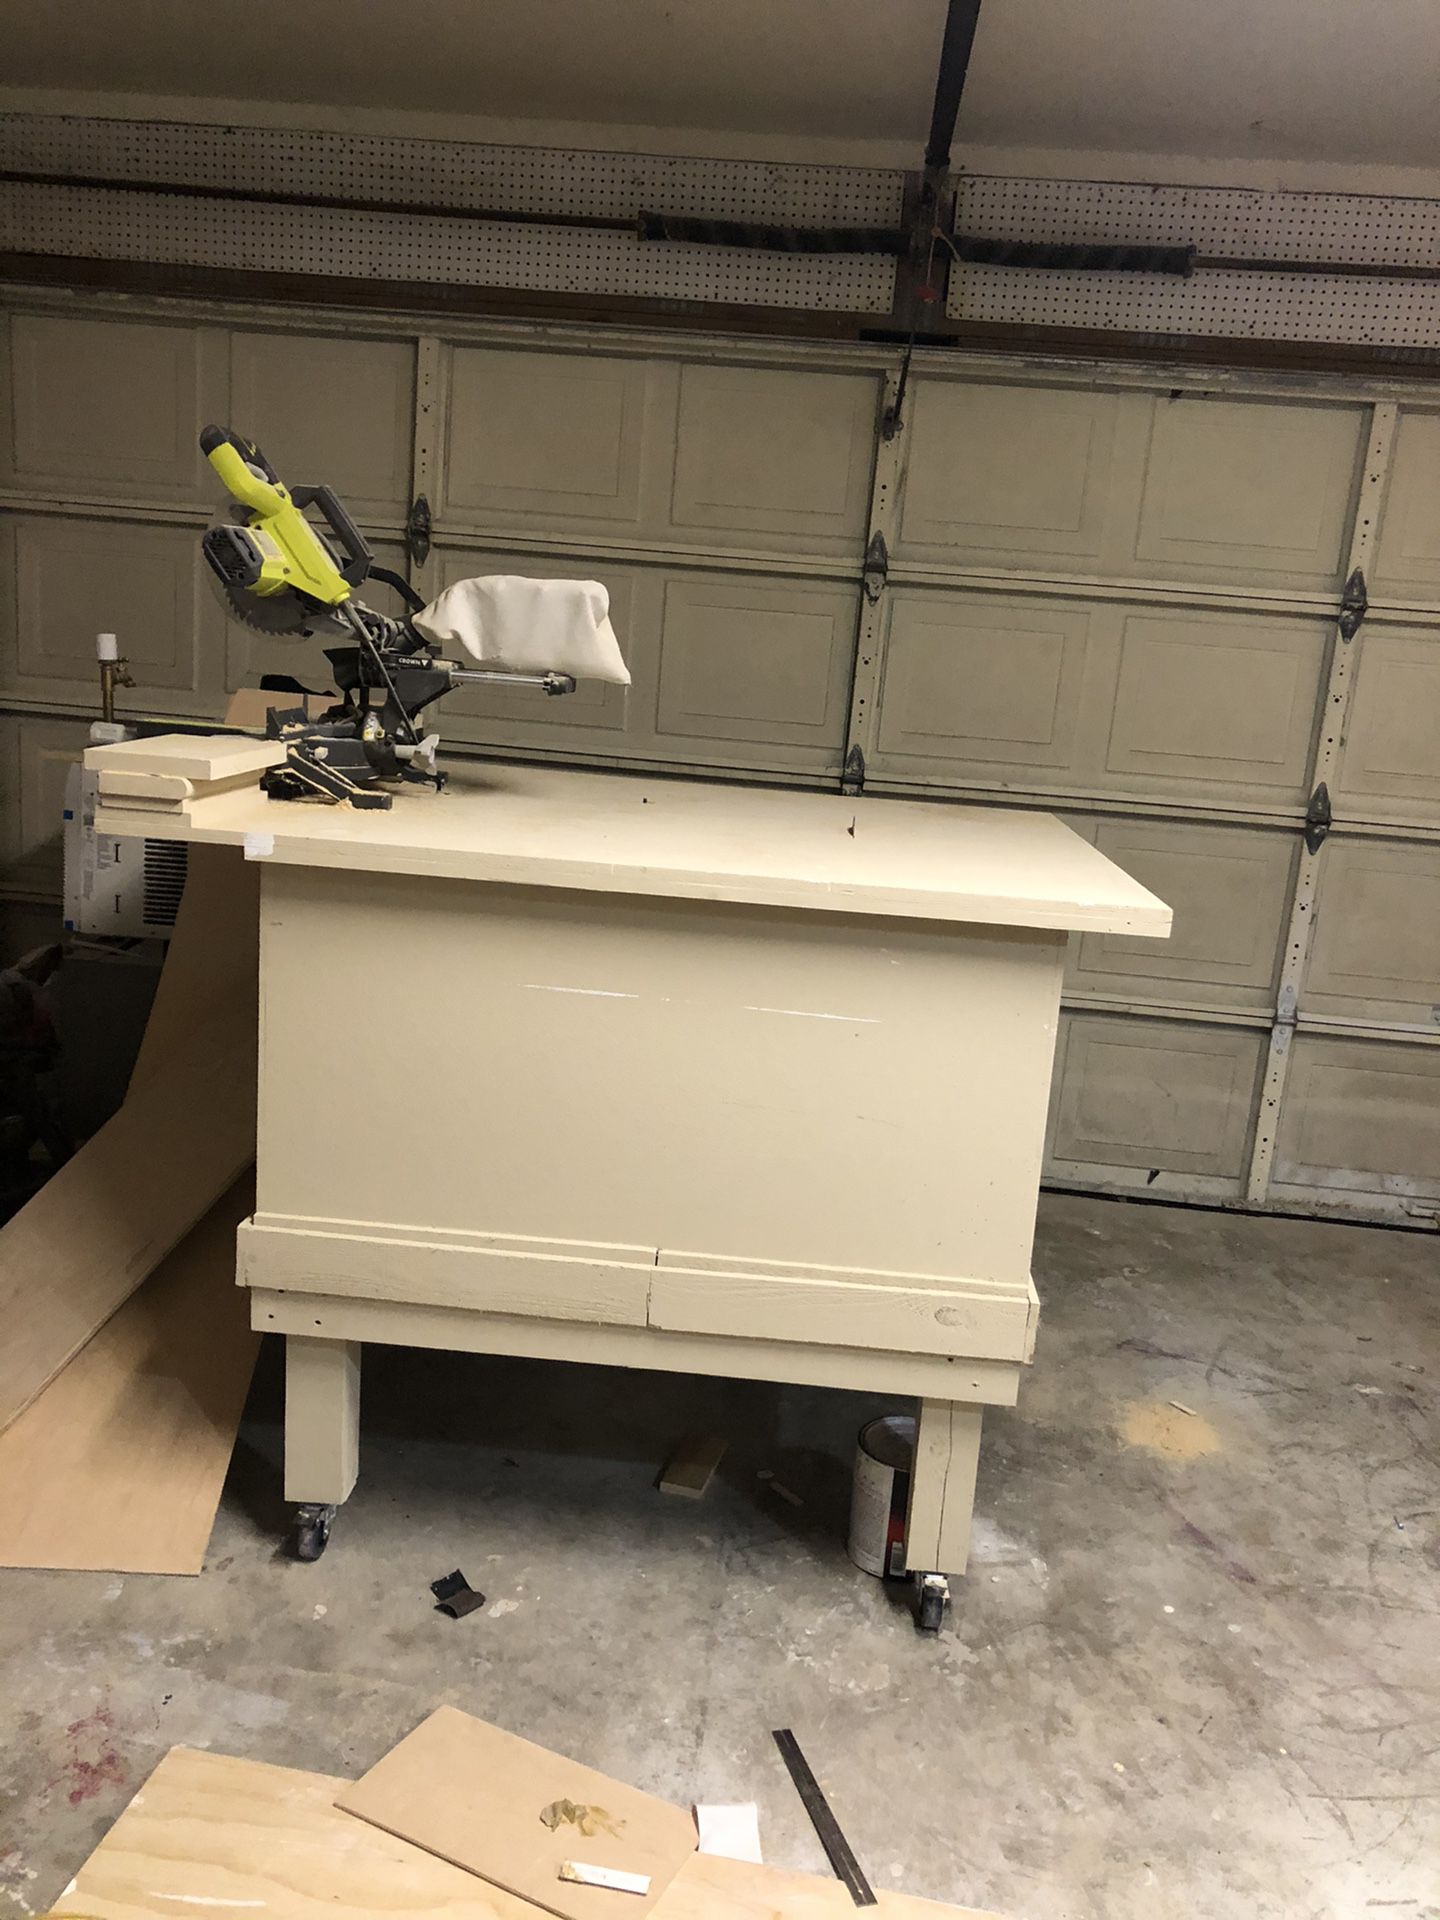 Table saw 4 in one